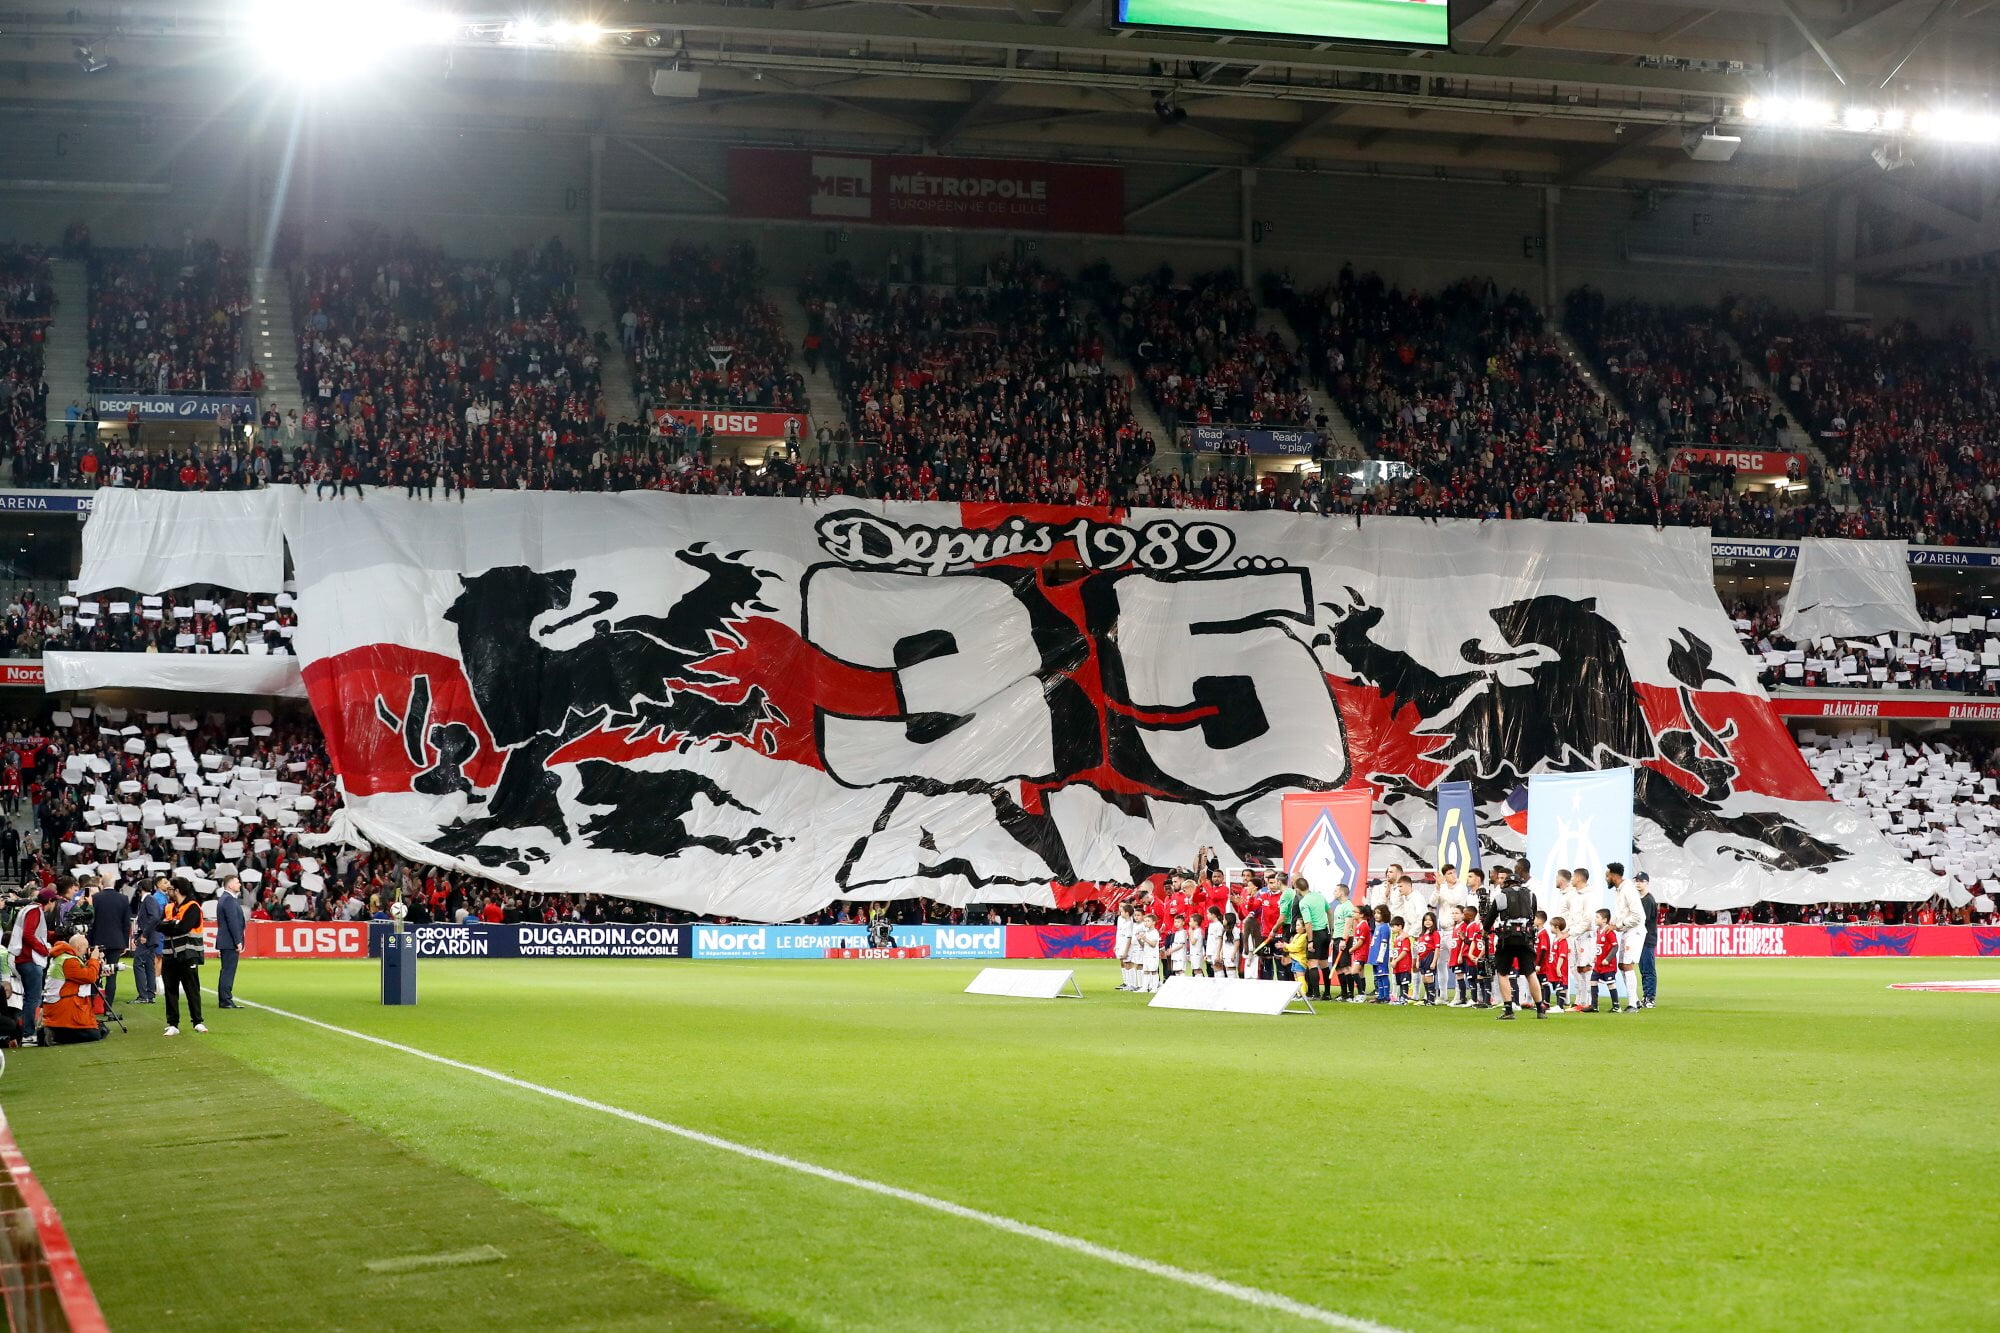 A tifo at Lille's home ground